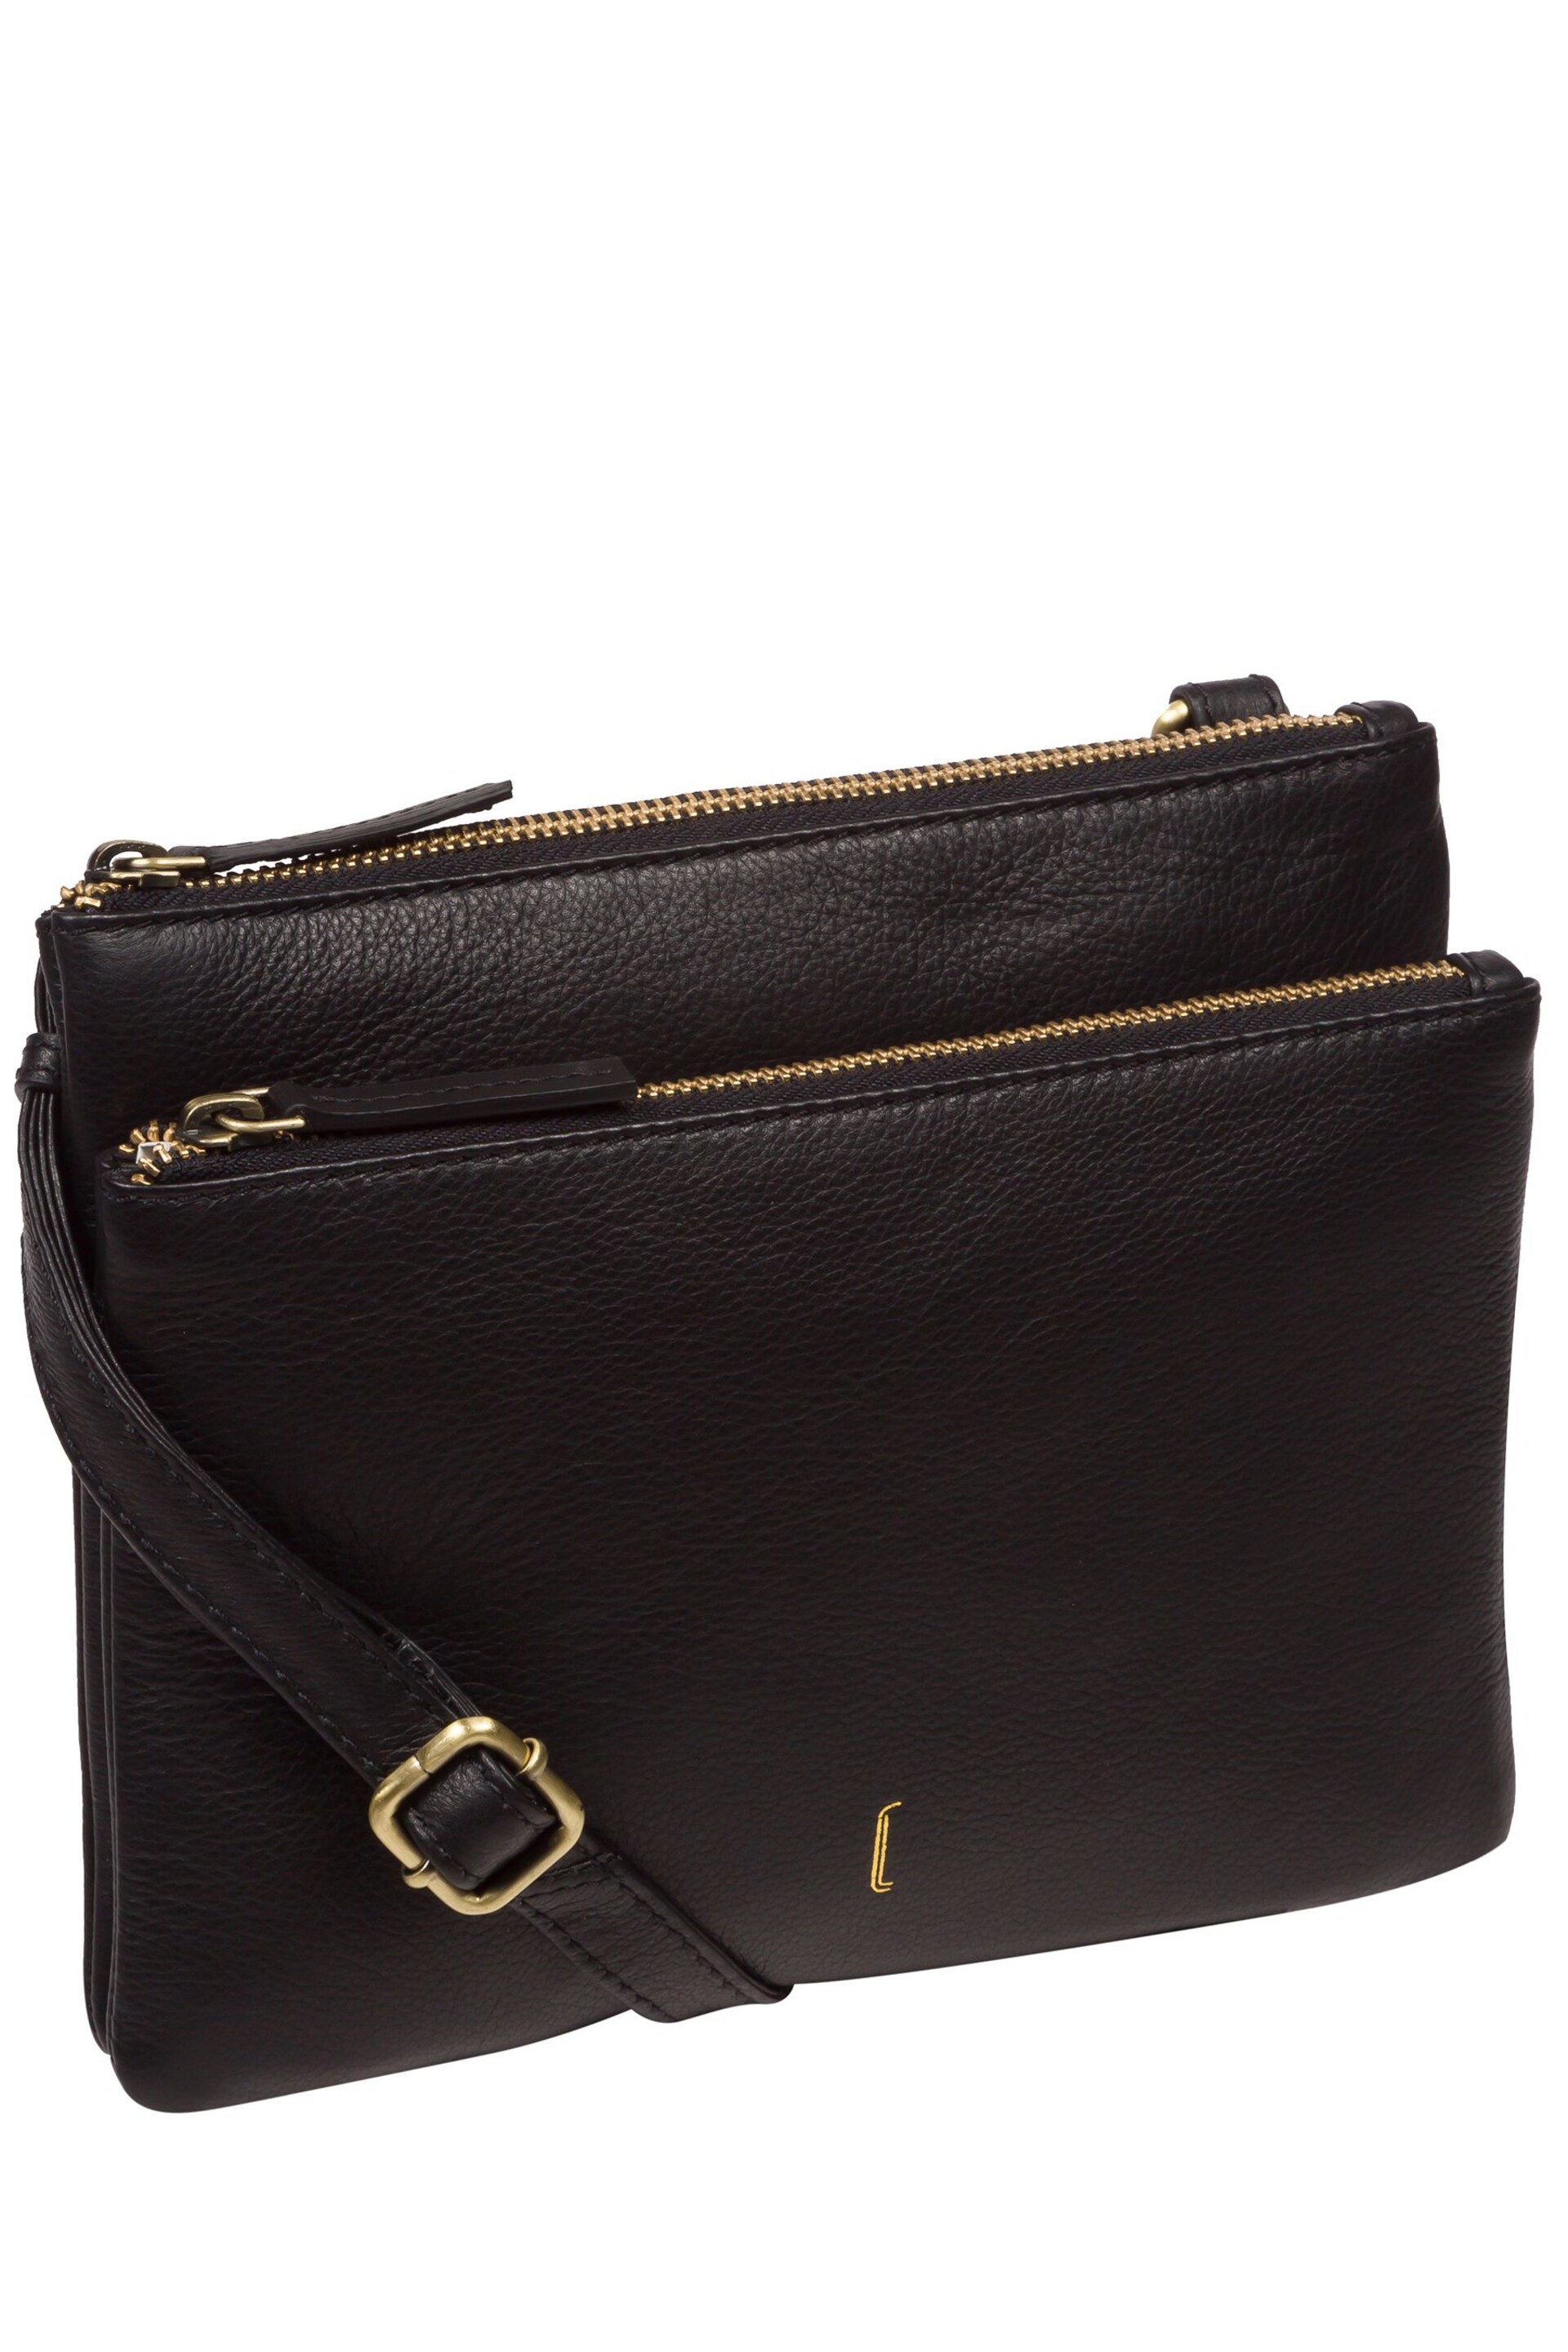 Cultured London Demi Leather Cross Body Bag - Image 4 of 5